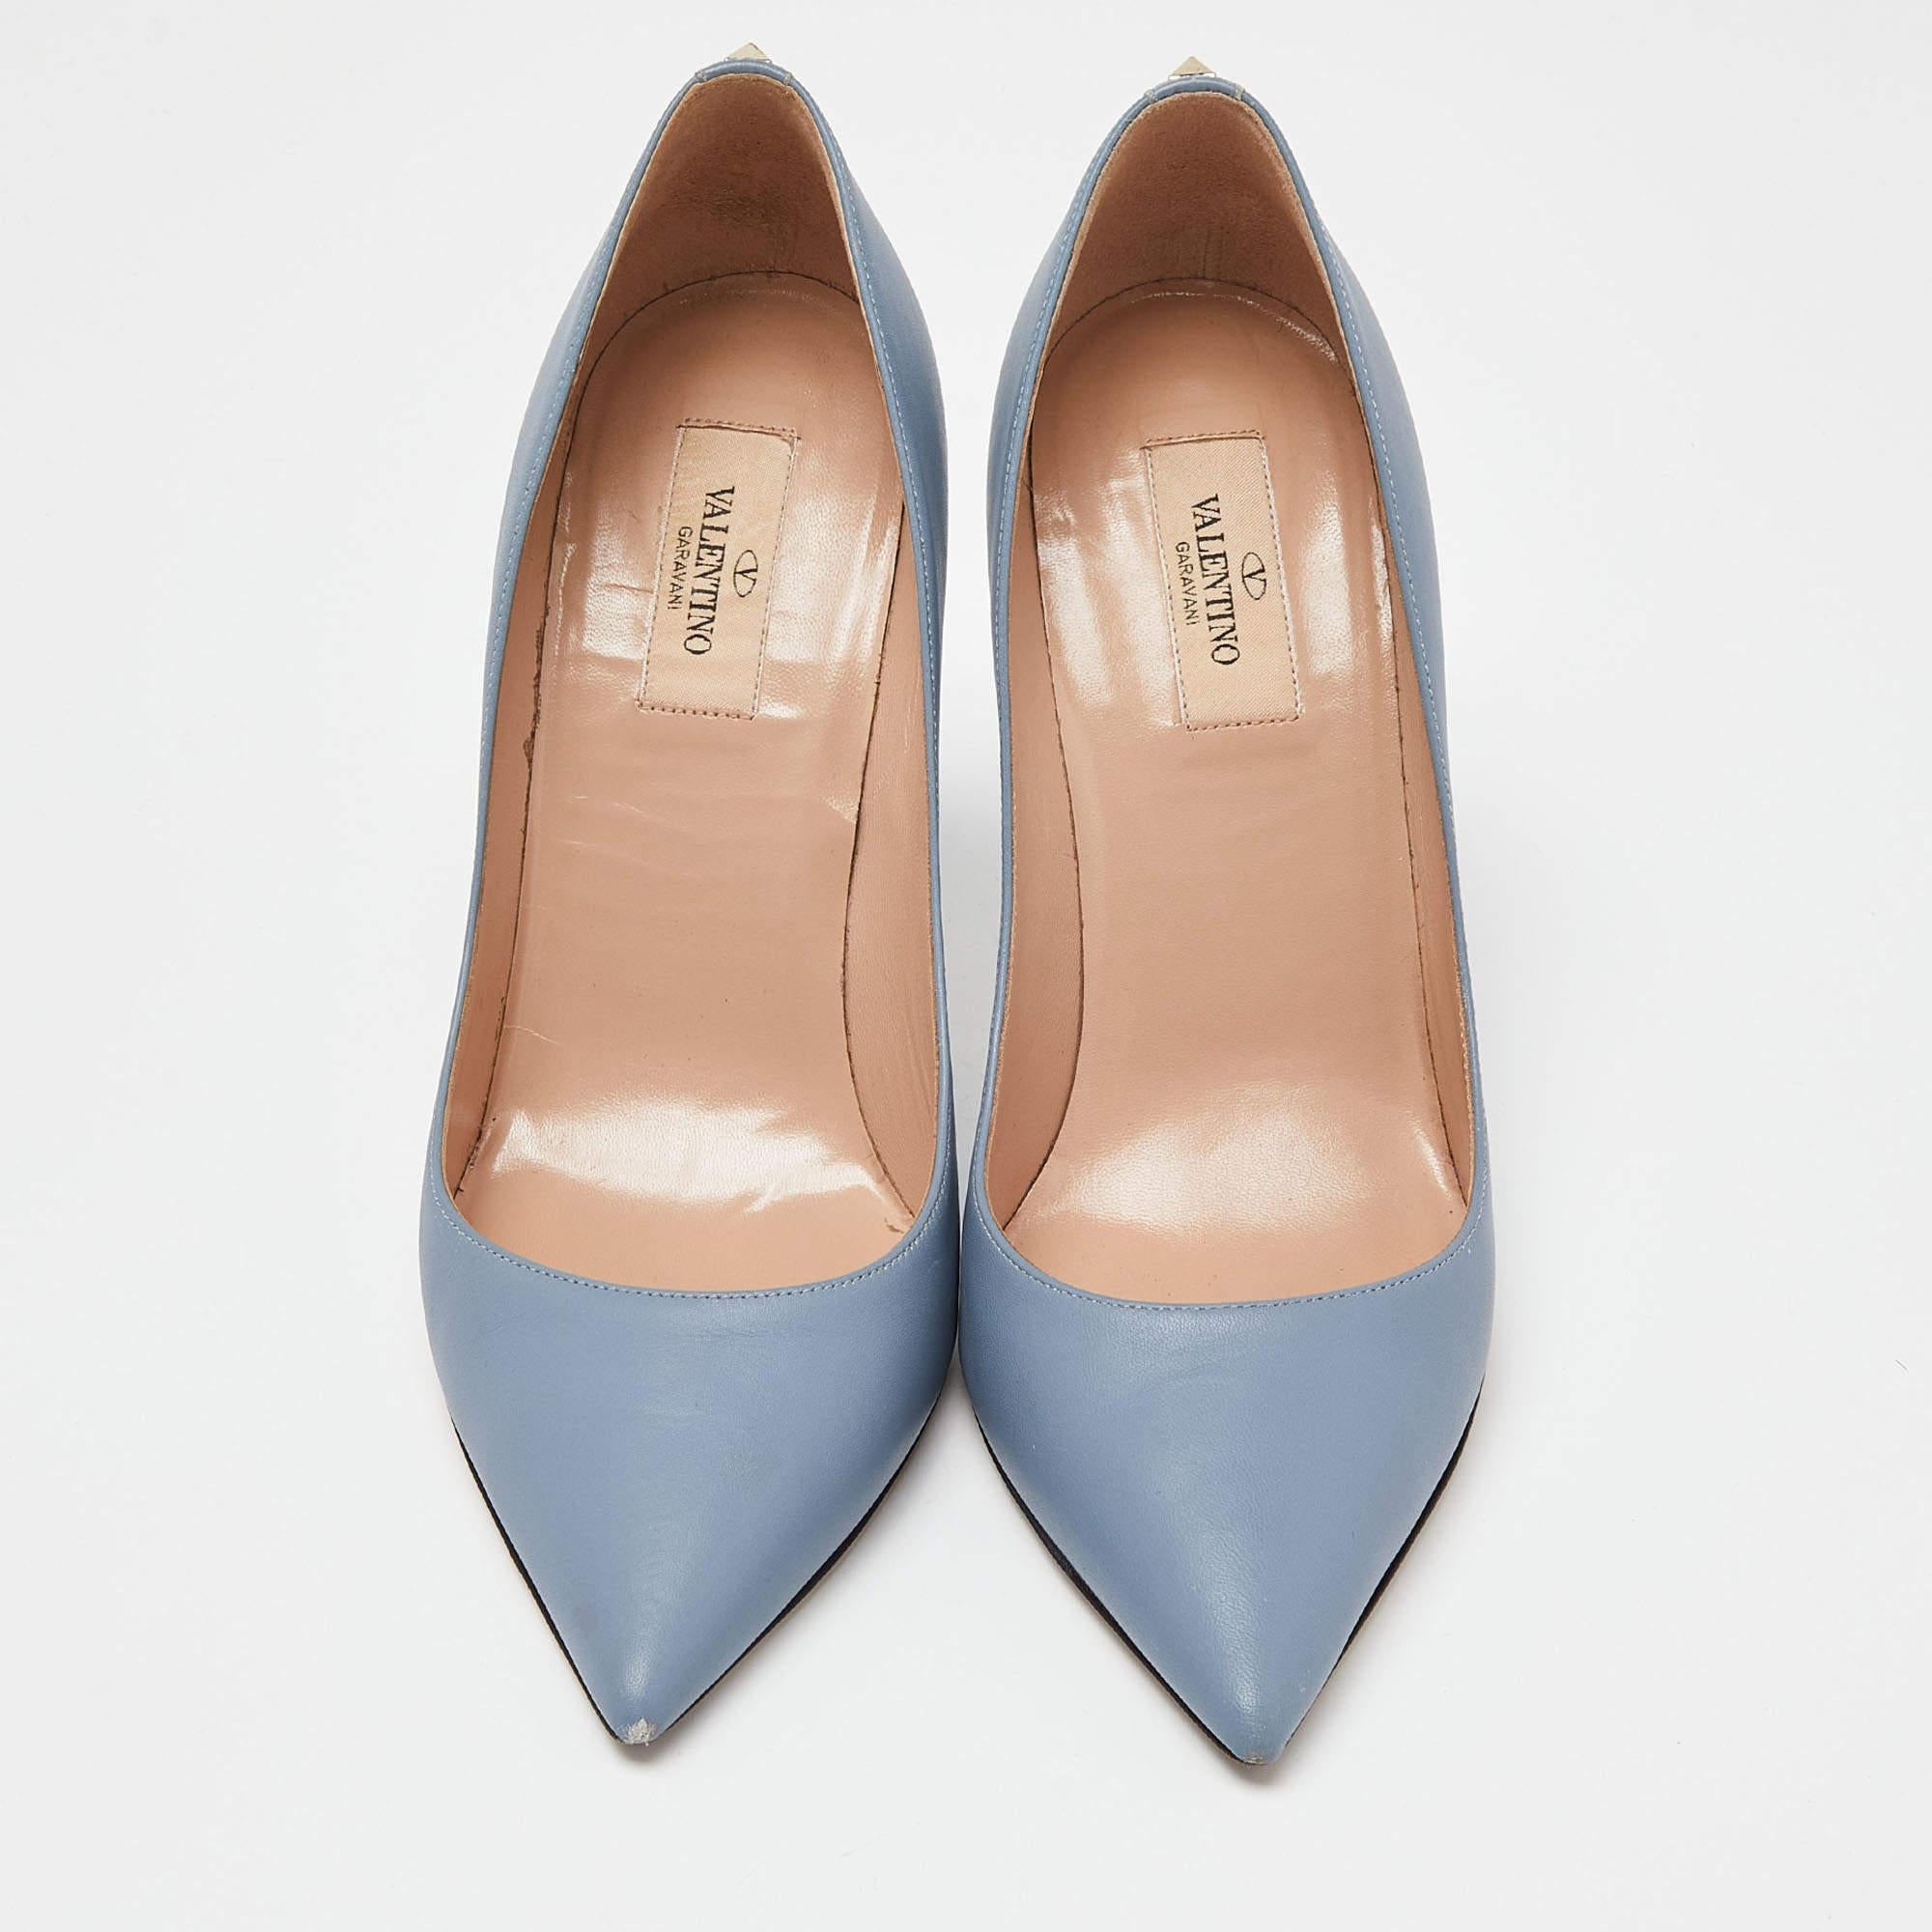 The fashion house’s tradition of excellence, coupled with modern design sensibilities, works to make these Valentino blue pumps a fabulous choice. They'll help you deliver a chic look with ease.

Includes: Original Dustbag, Original Box, Info